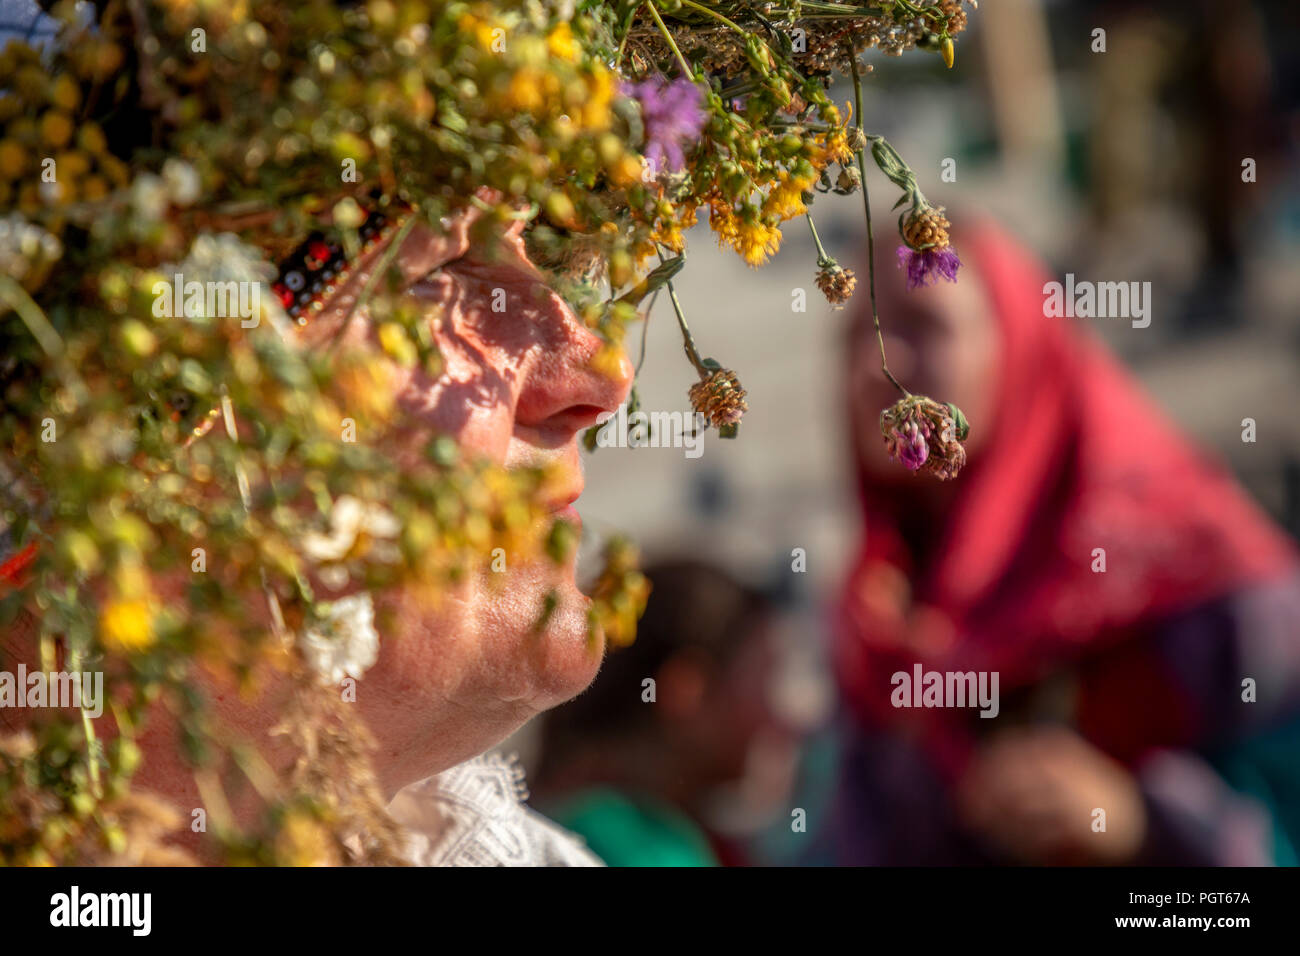 Girls in Russian sarafans and with flower wreaths on their heads during a village holiday Stock Photo